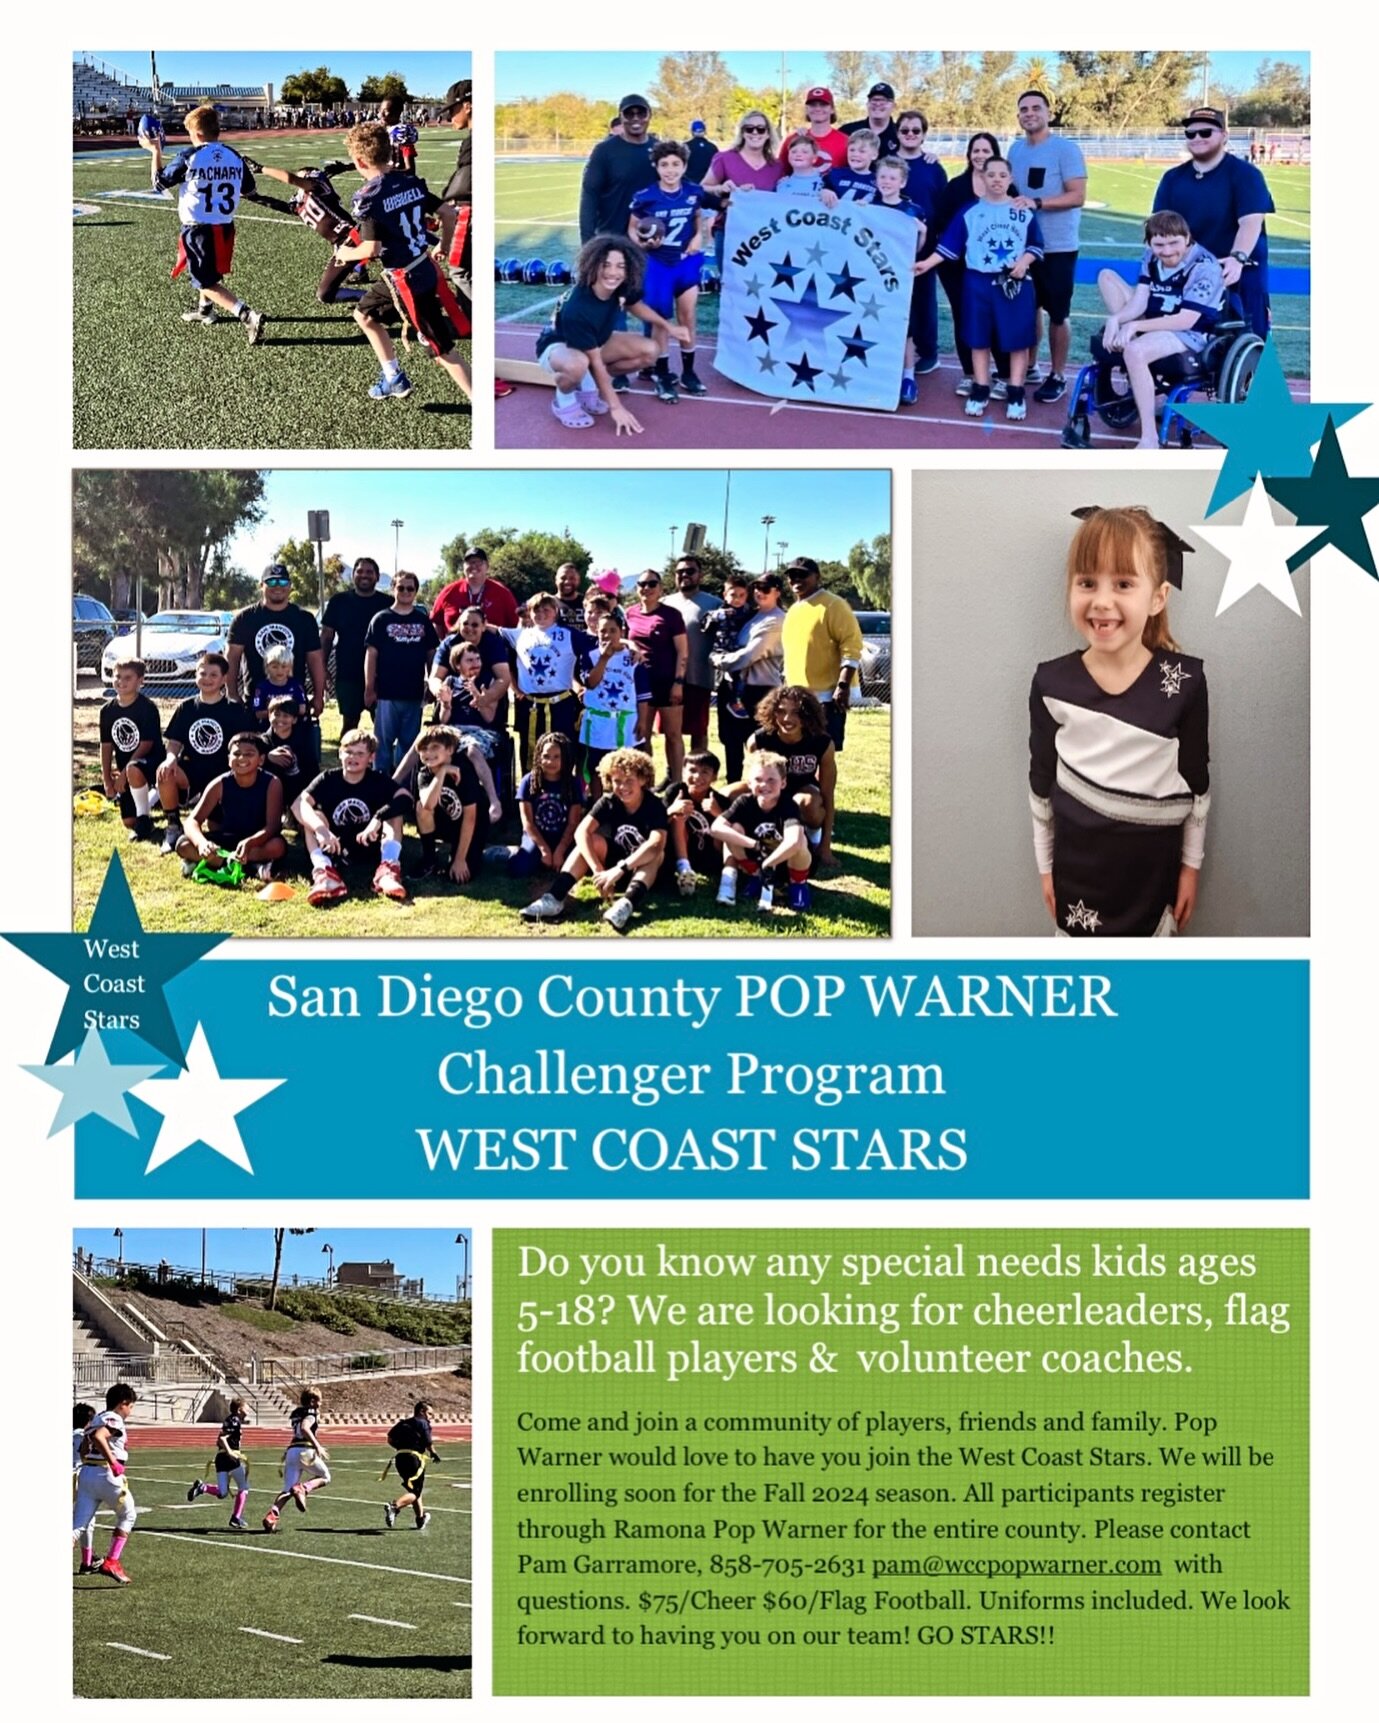 WCC supports our Conference of POP WARNER Challenger WEST COAST STARS Football Players and Cheerleaders!

Please reach out to Pam at Pam@wccpopwarner.com and the support volunteer staff Coach Moose (President of San Marcos Pop Warner) at President@sa